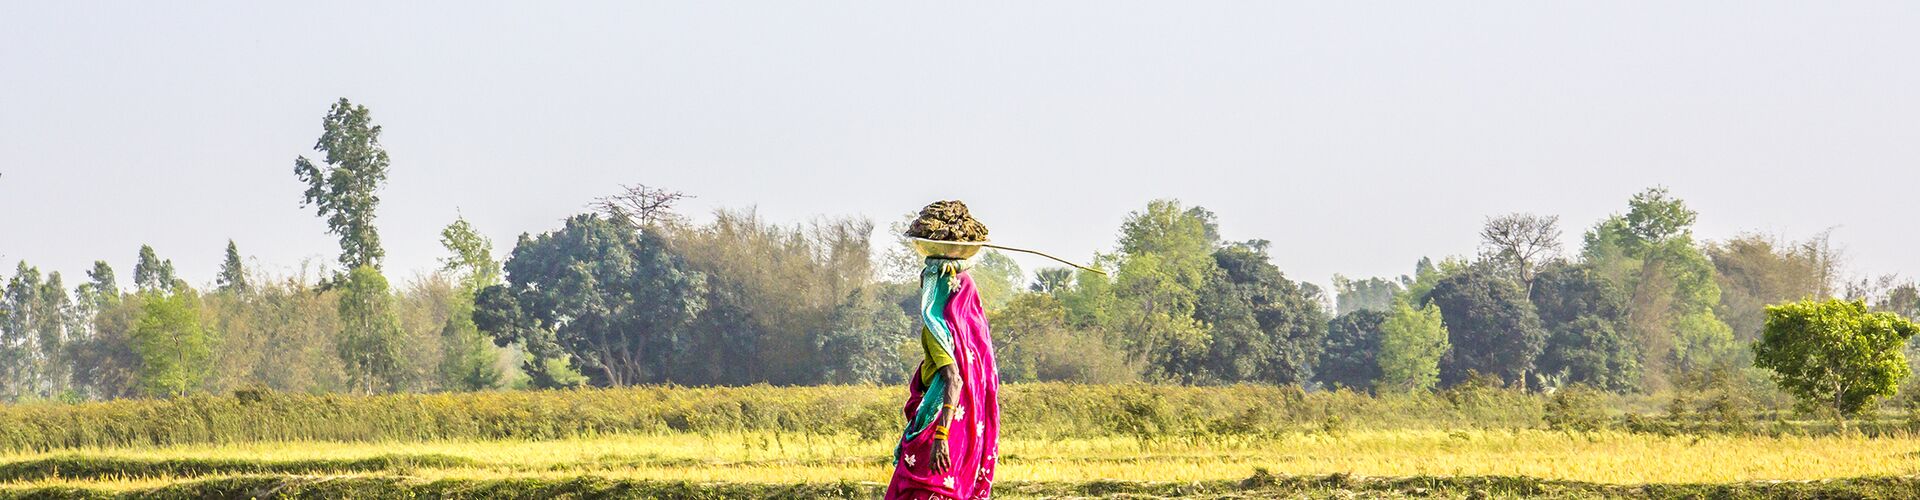 A local Nepalese woman walking and carrying fresh produce on her head in the countryside